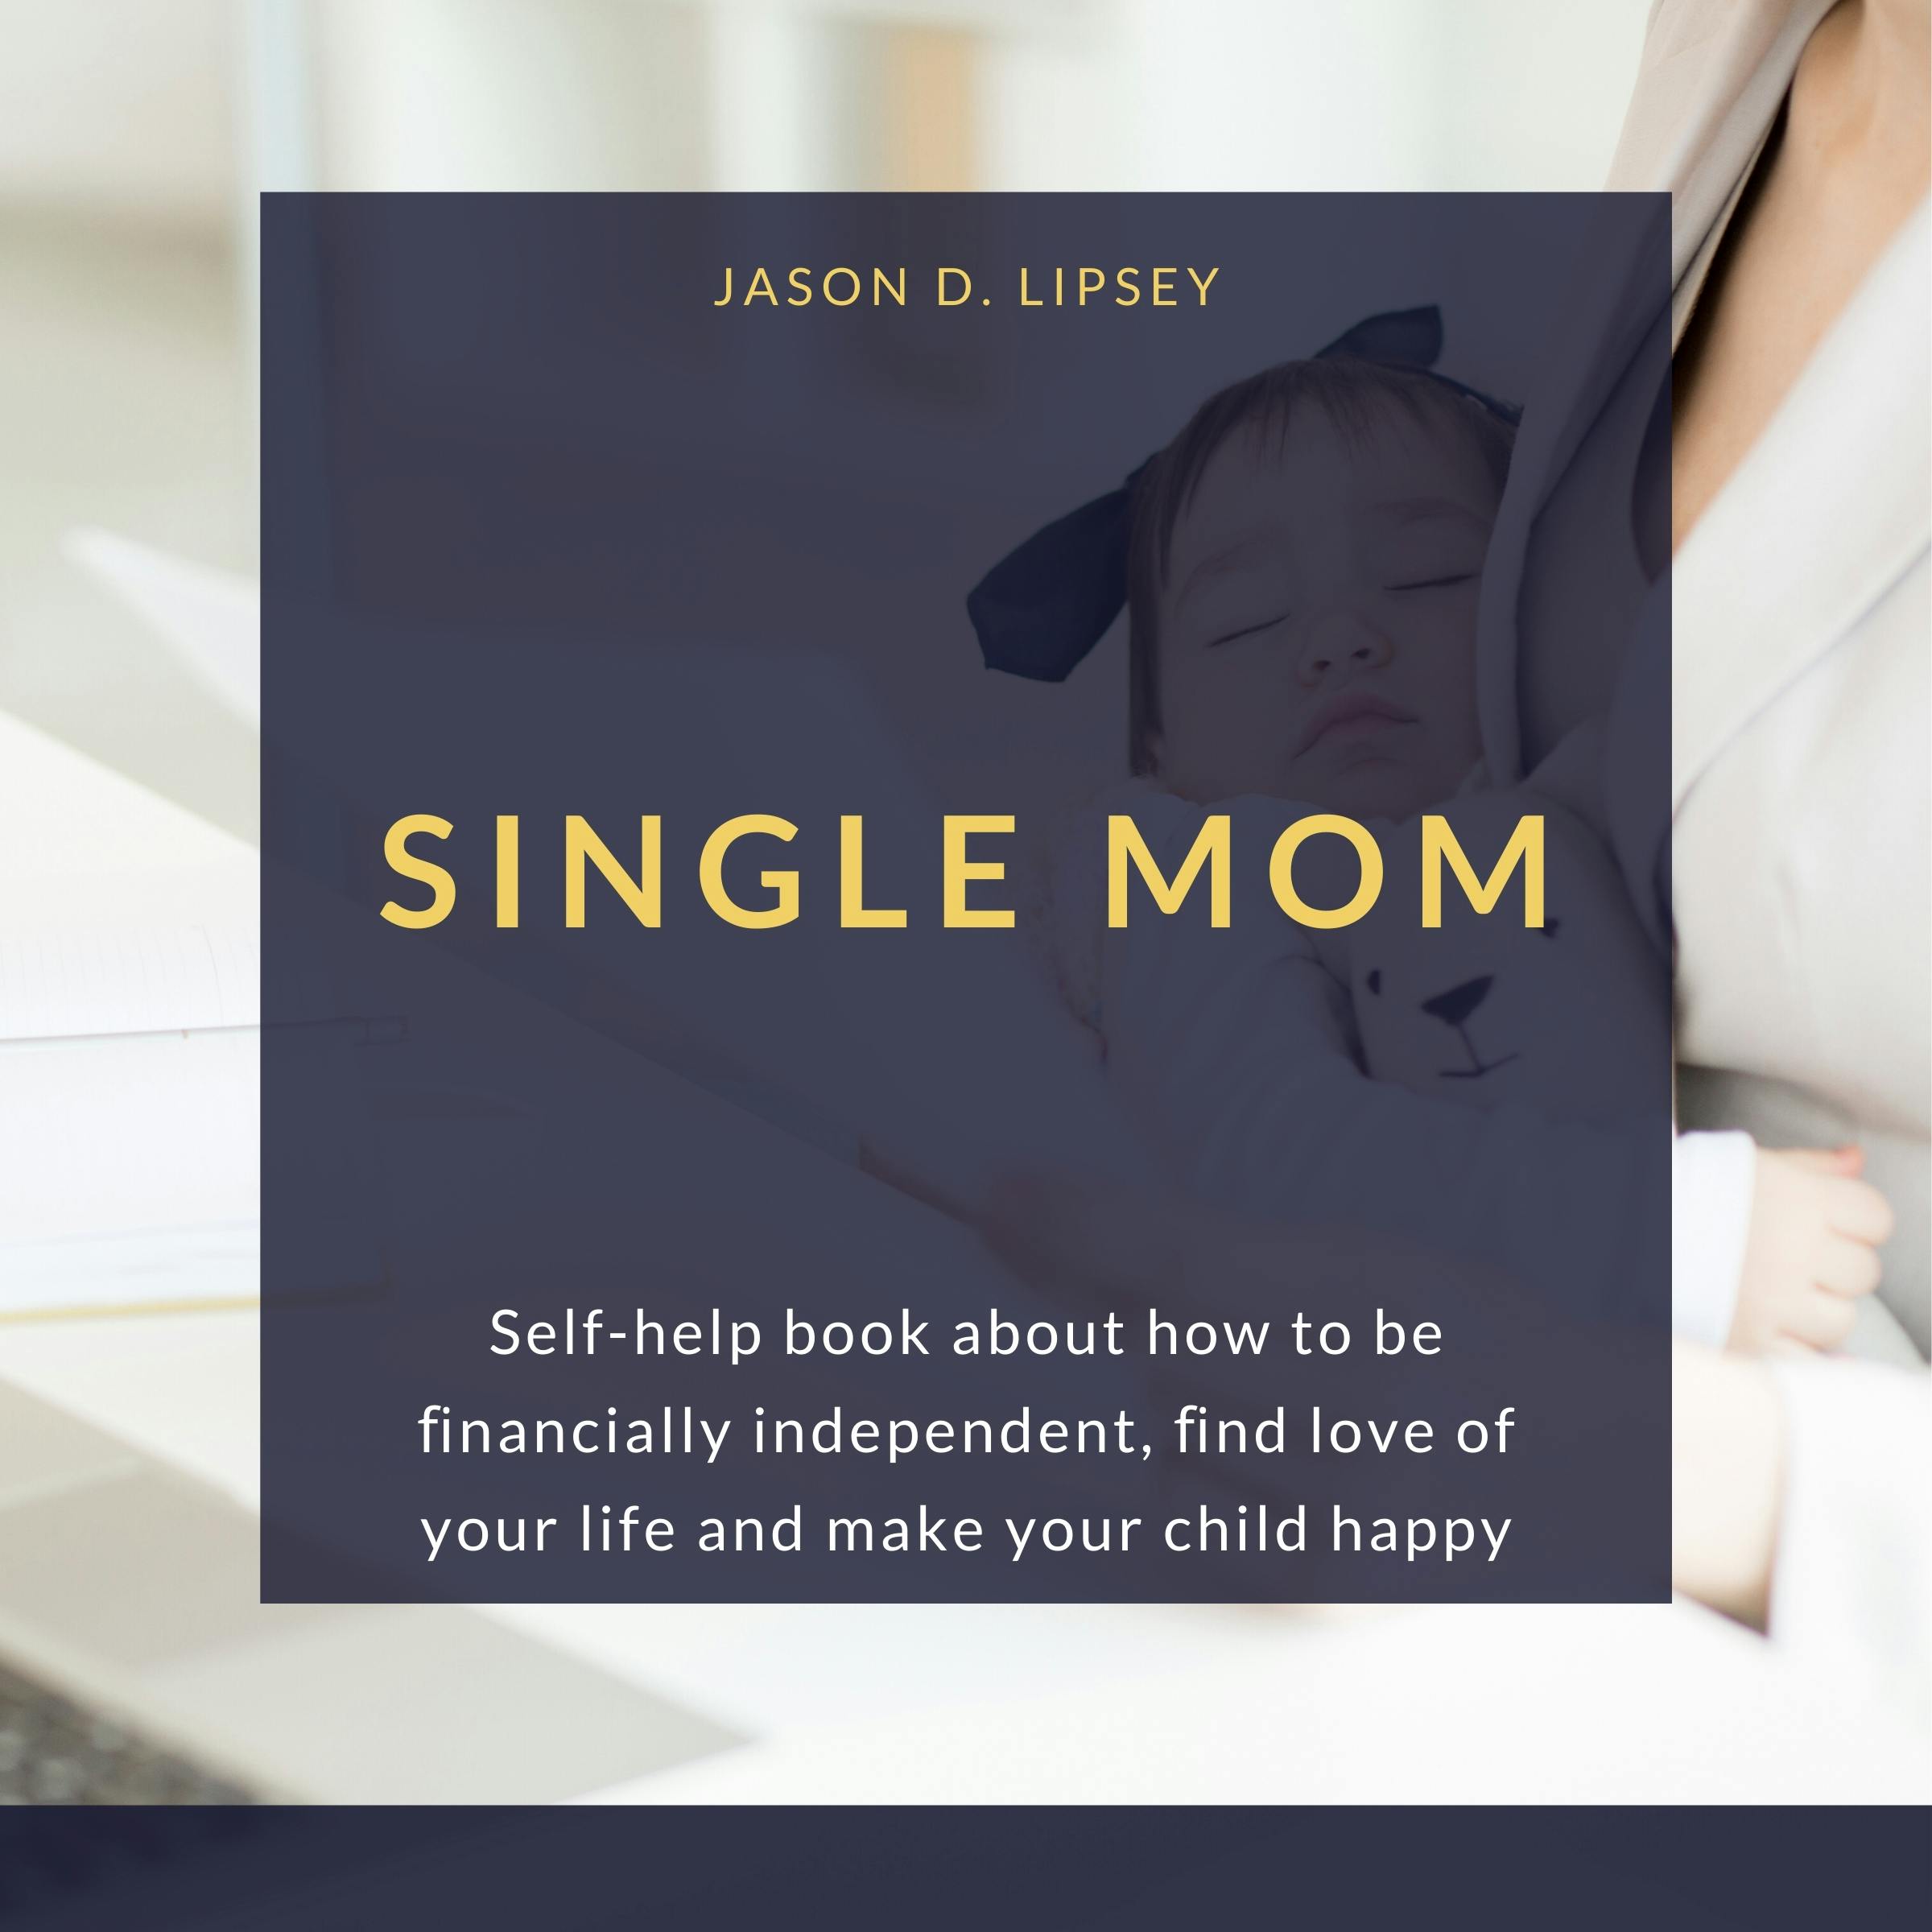 SINGLE MOM: Self-help book about how to be ﬁnancially independent, ﬁnd love of your life and make your child happy - Jason D. lipsey